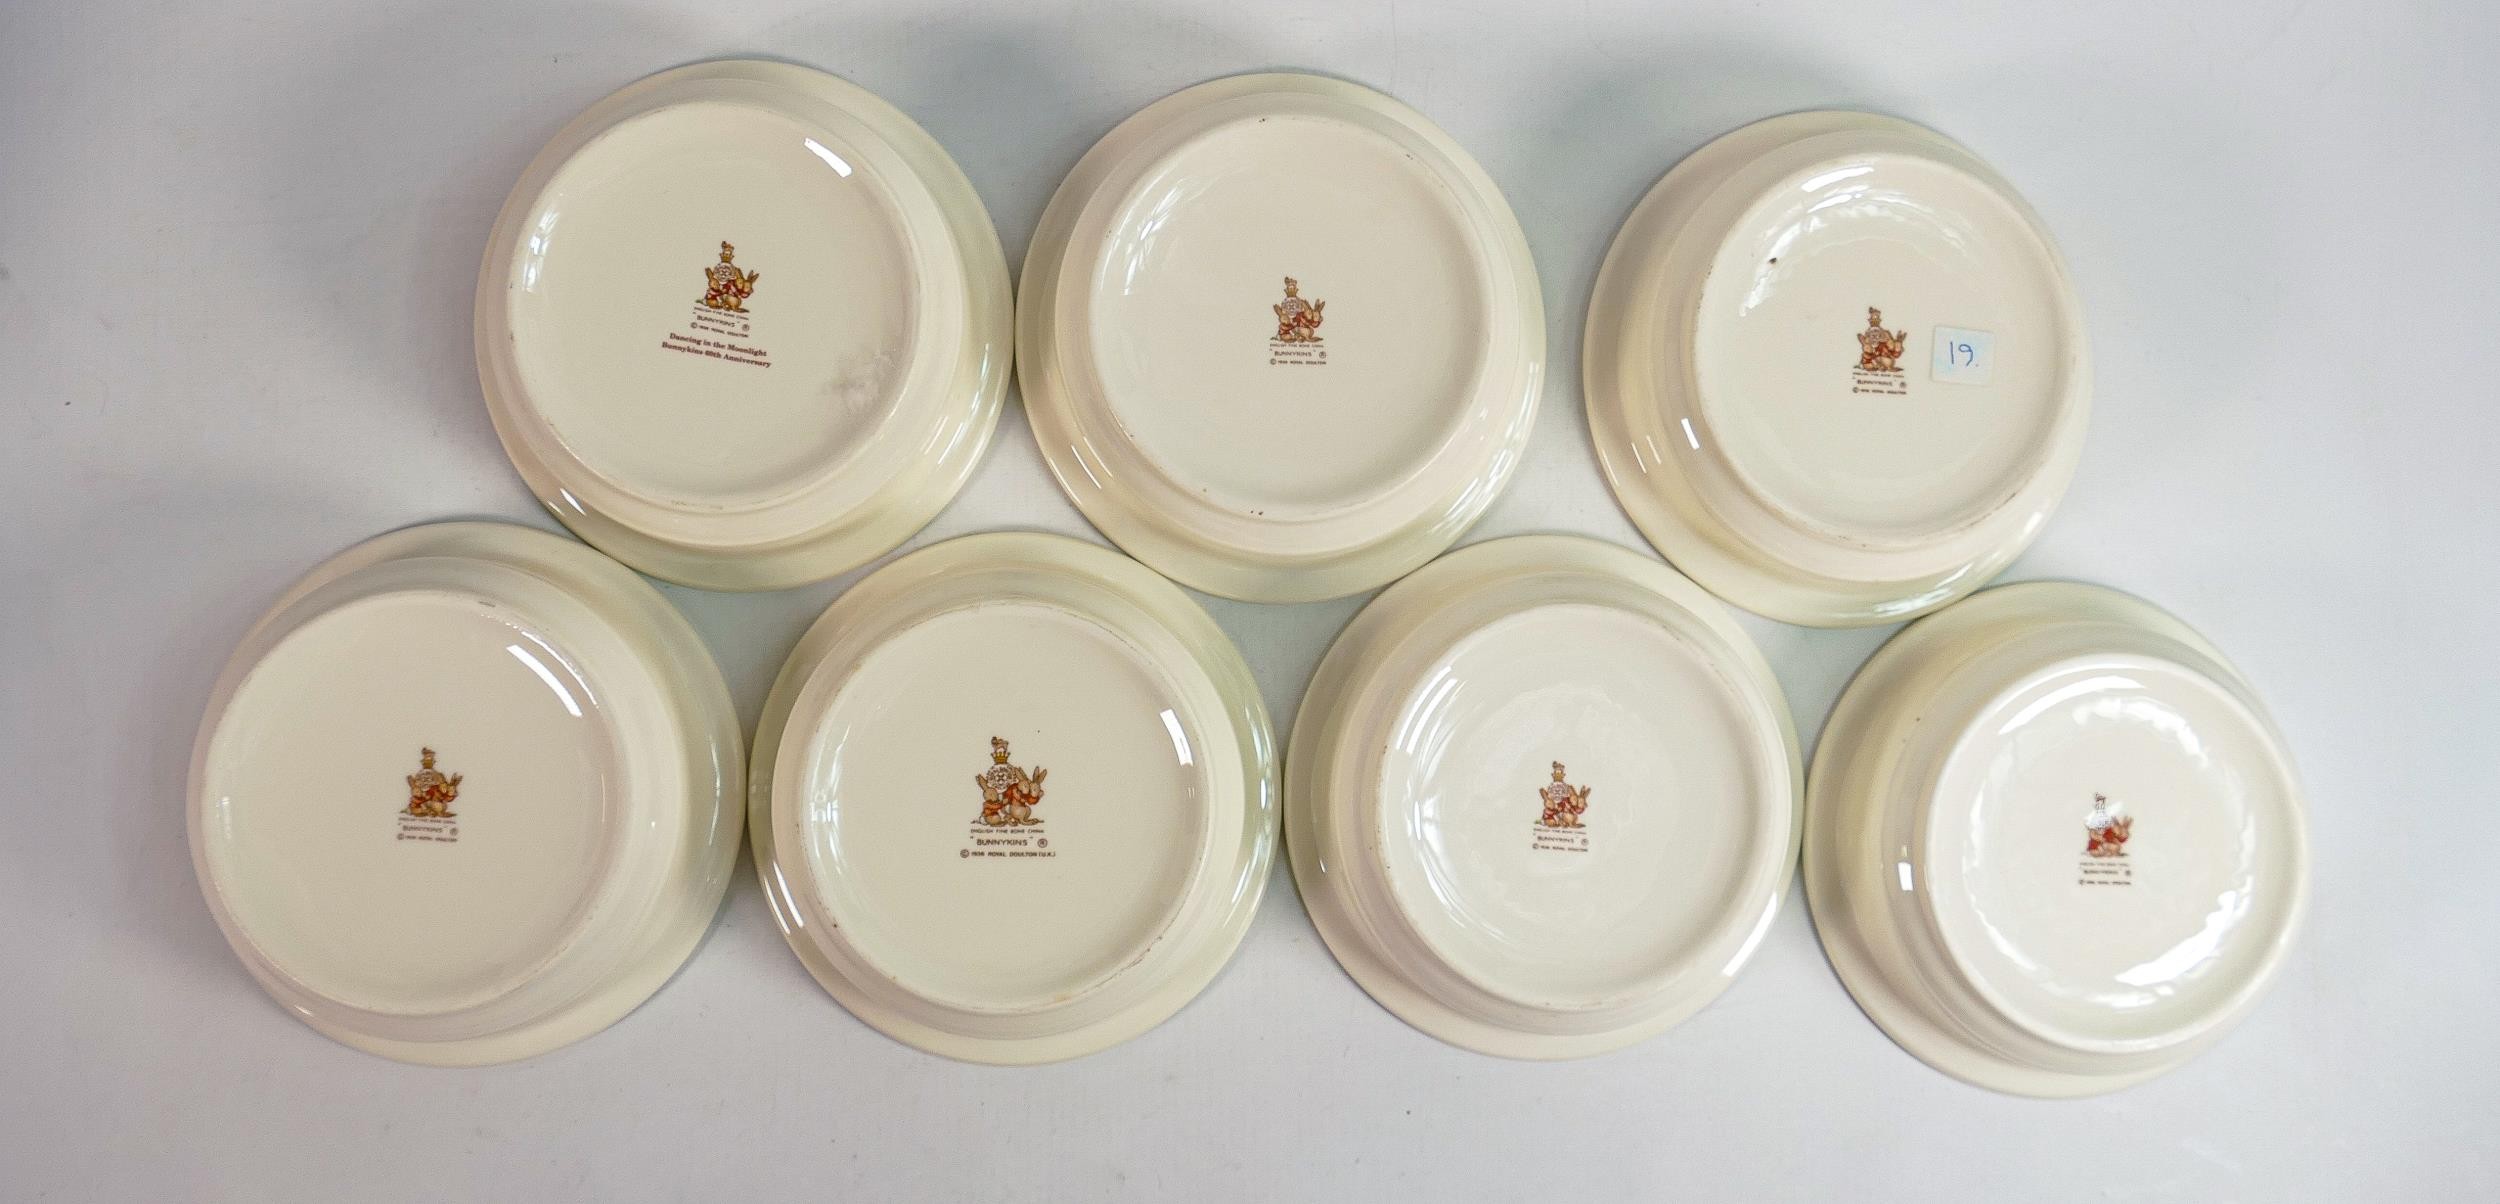 Royal Doulton Bunnykins small round baby plates, each 16cm. (7) - Image 2 of 3